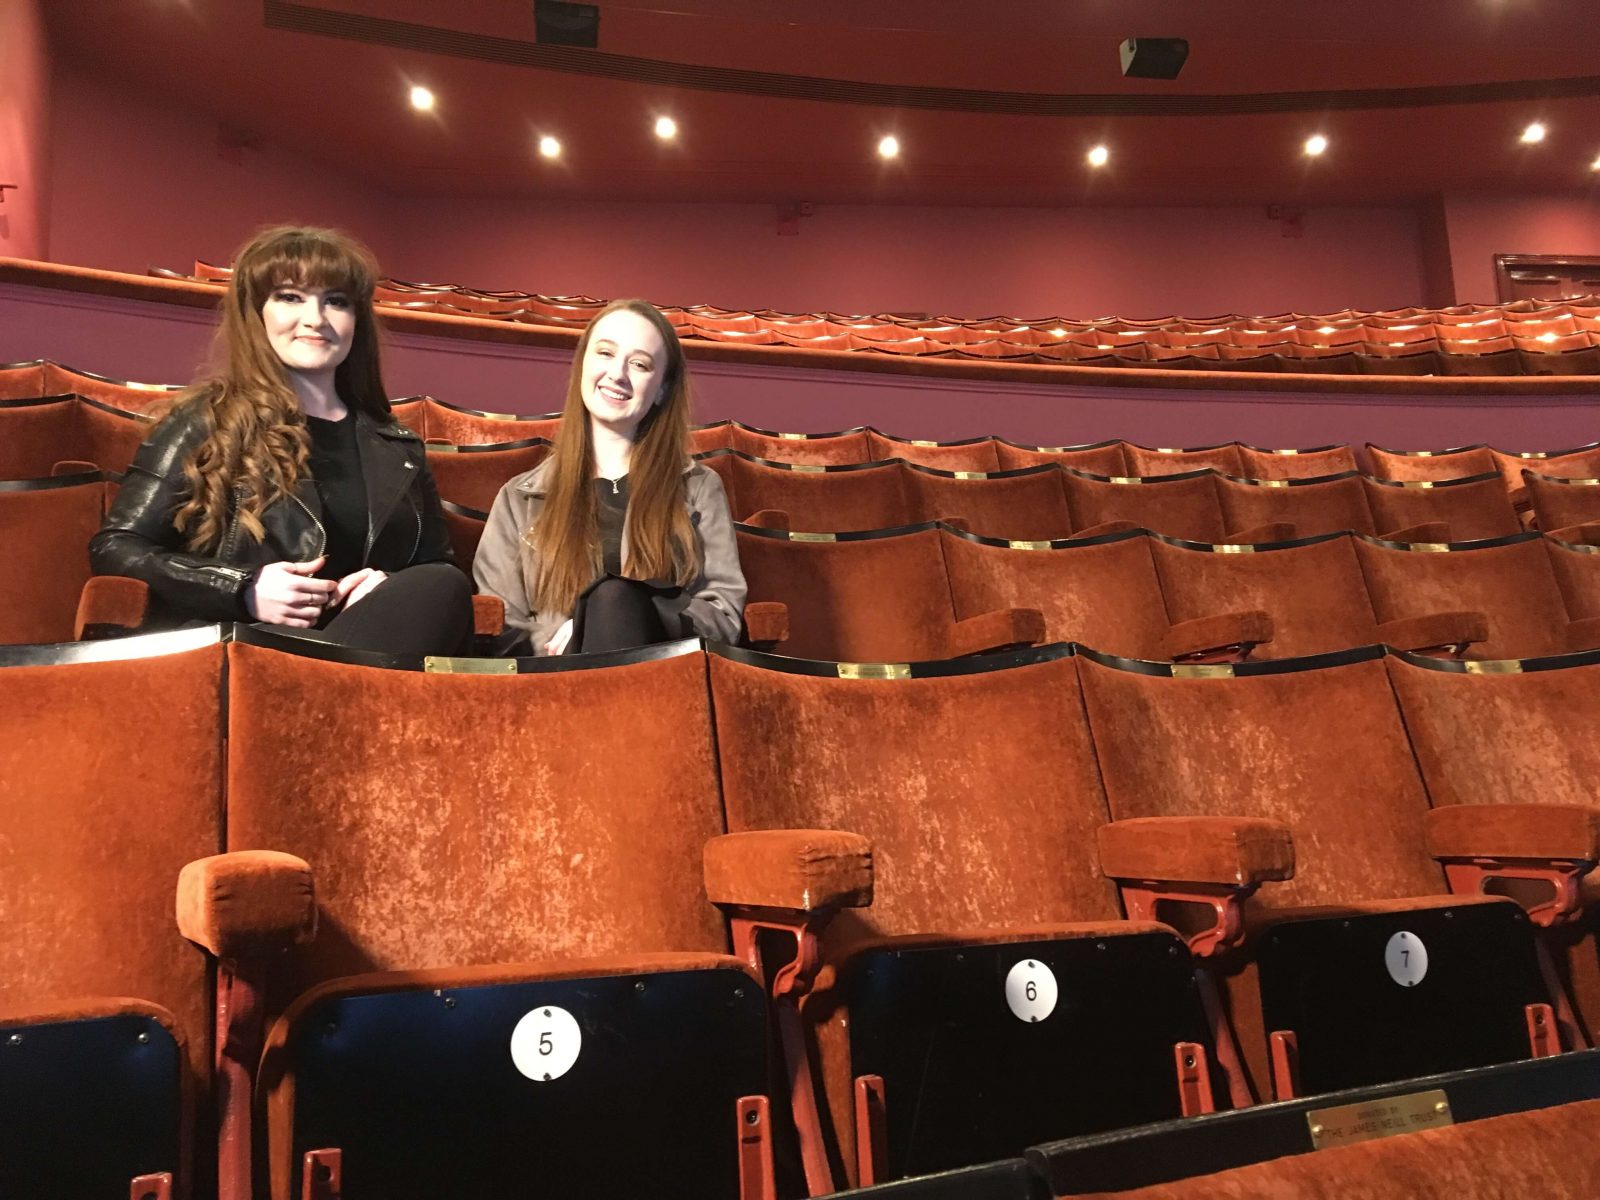 izzy and pippa sat in seats in empty theatre auditorium, facing camera and smiling 